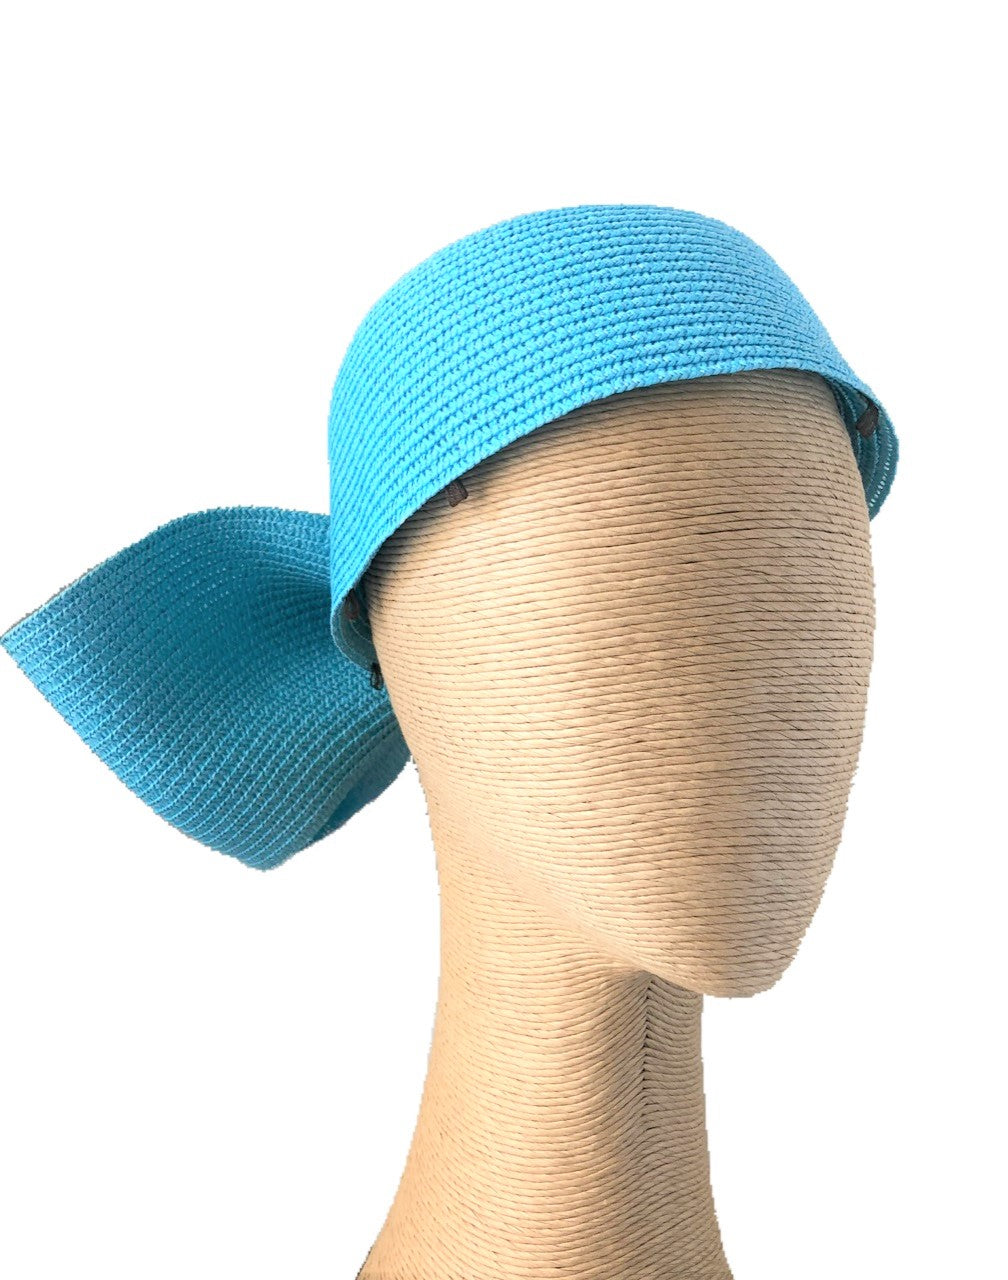 Claire Hahn Teagan Back Bow Headpiece in Turquoise